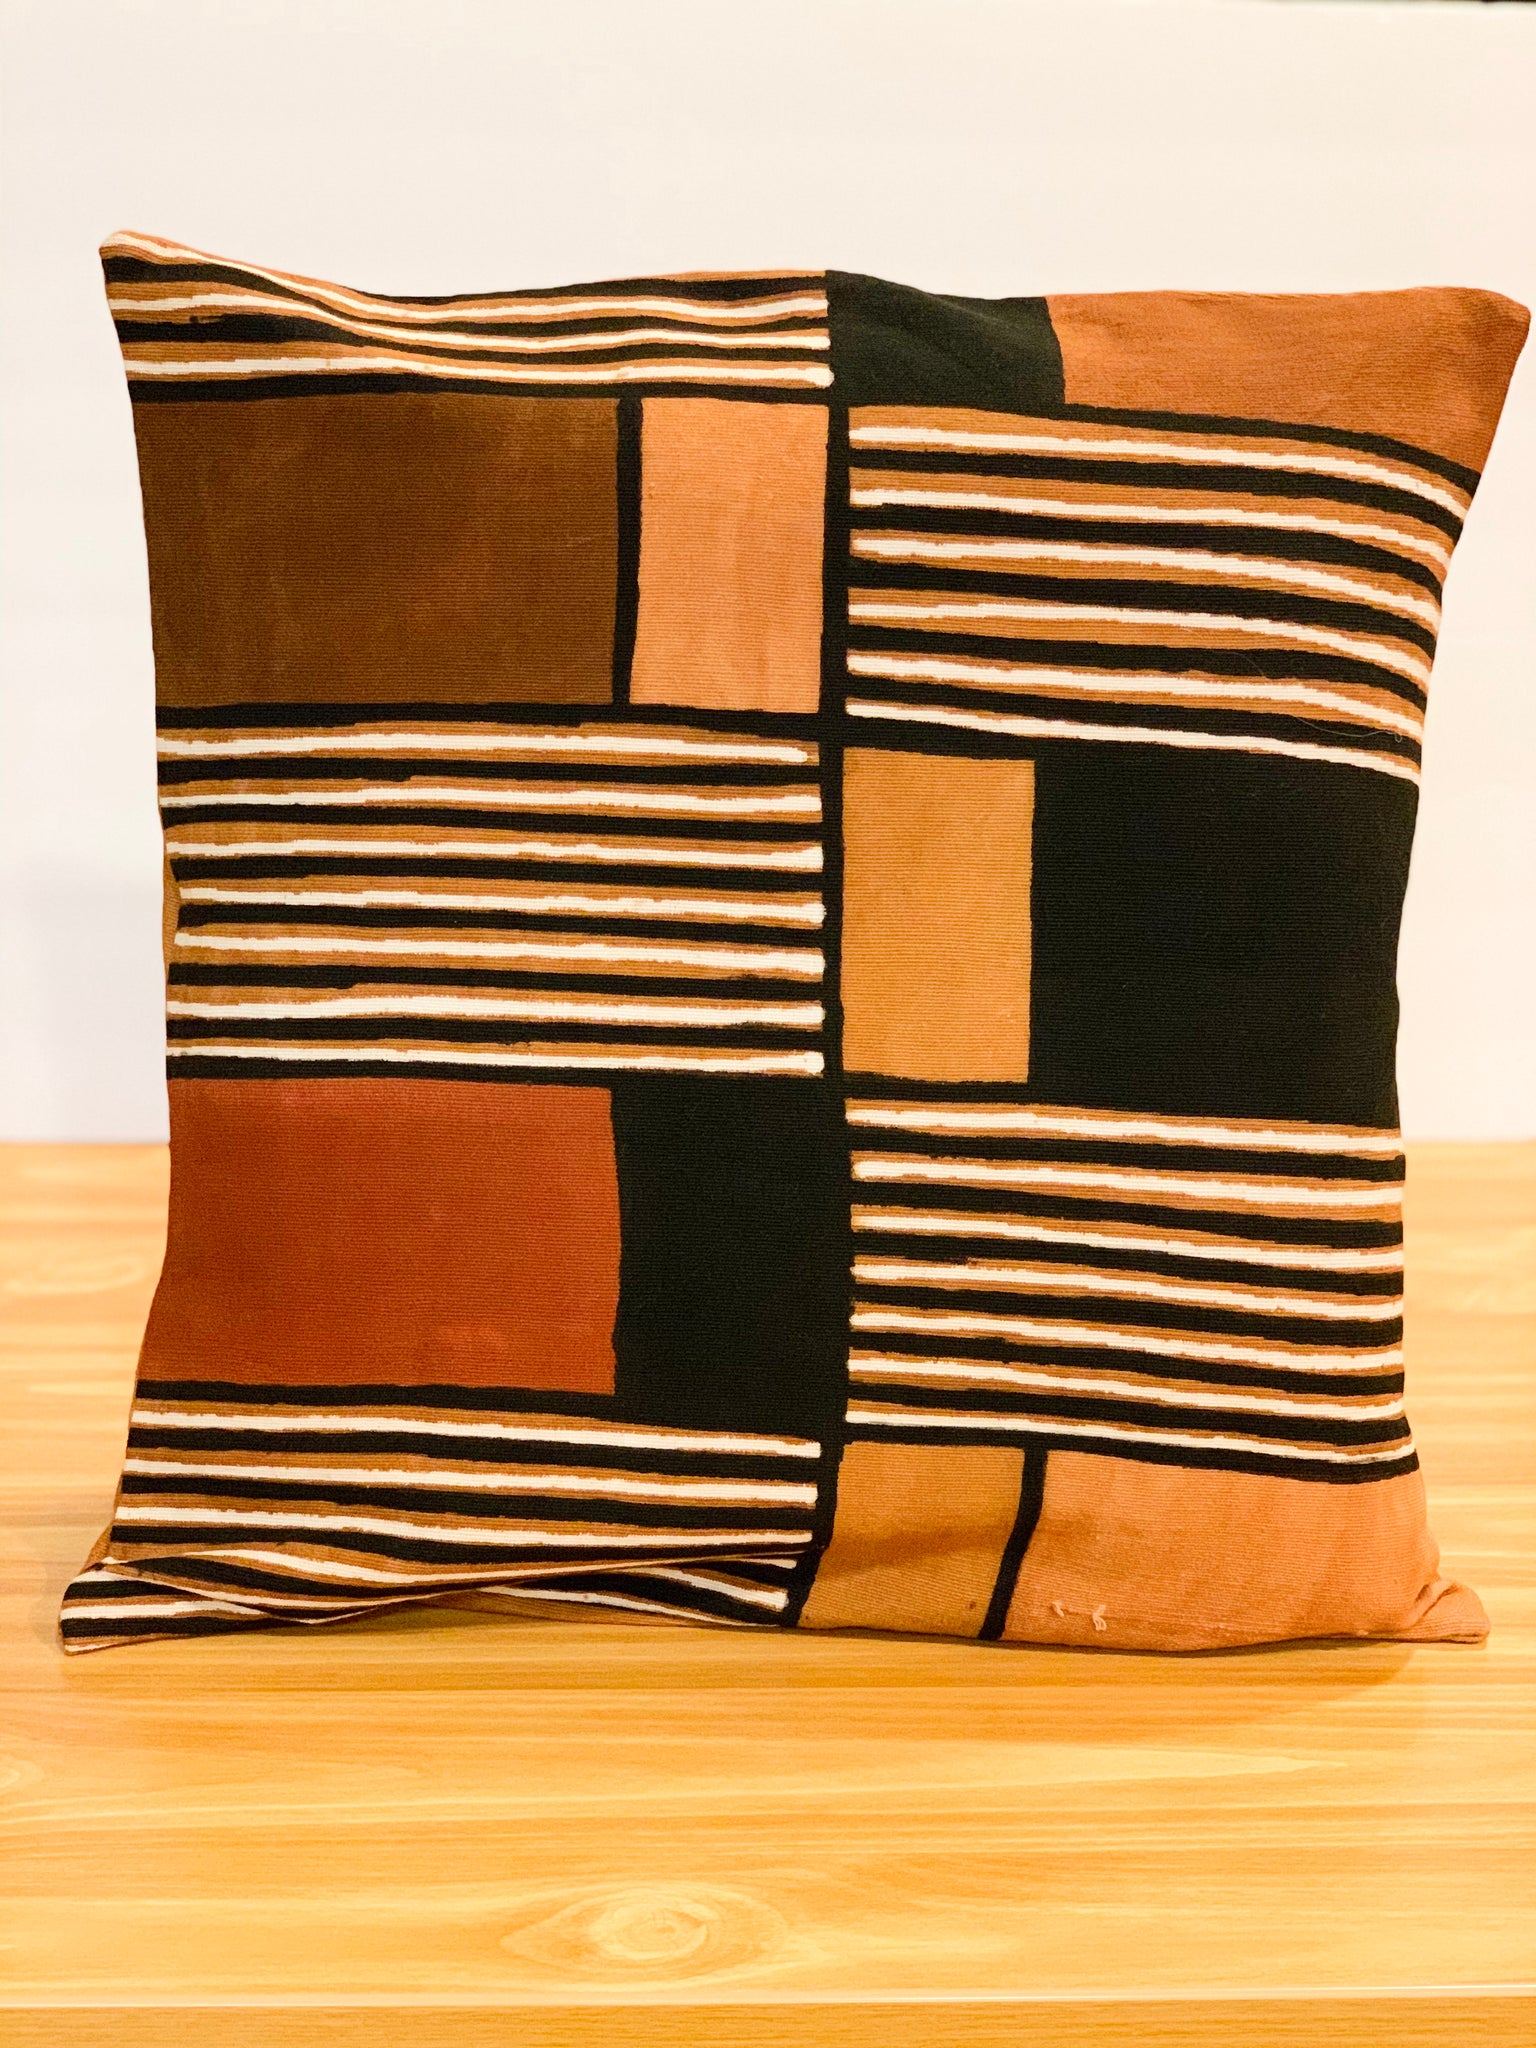 This earthy cushion cover combines ancient technique with contemporary design to craft a one-of-a-kind geometric Bògòlanfini piece.